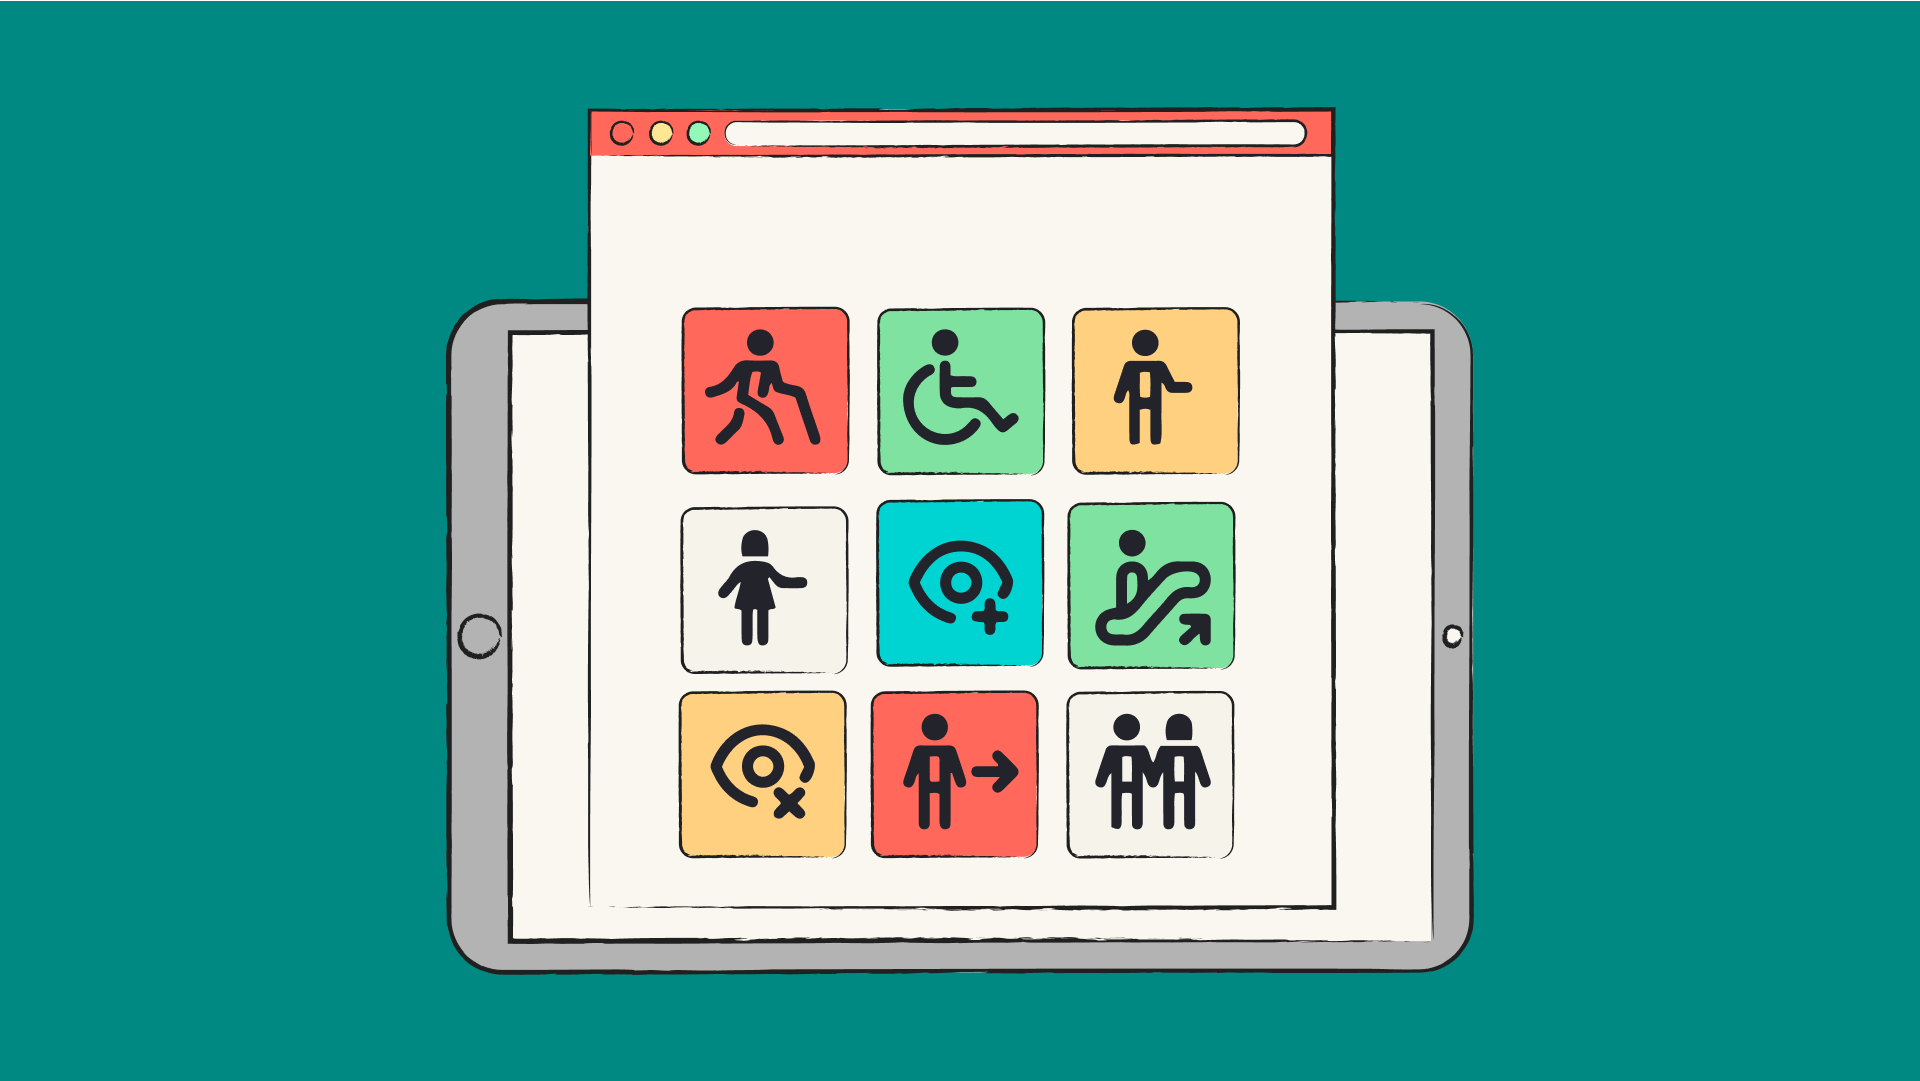 Why is accessibility important in web design? (10 minute read)